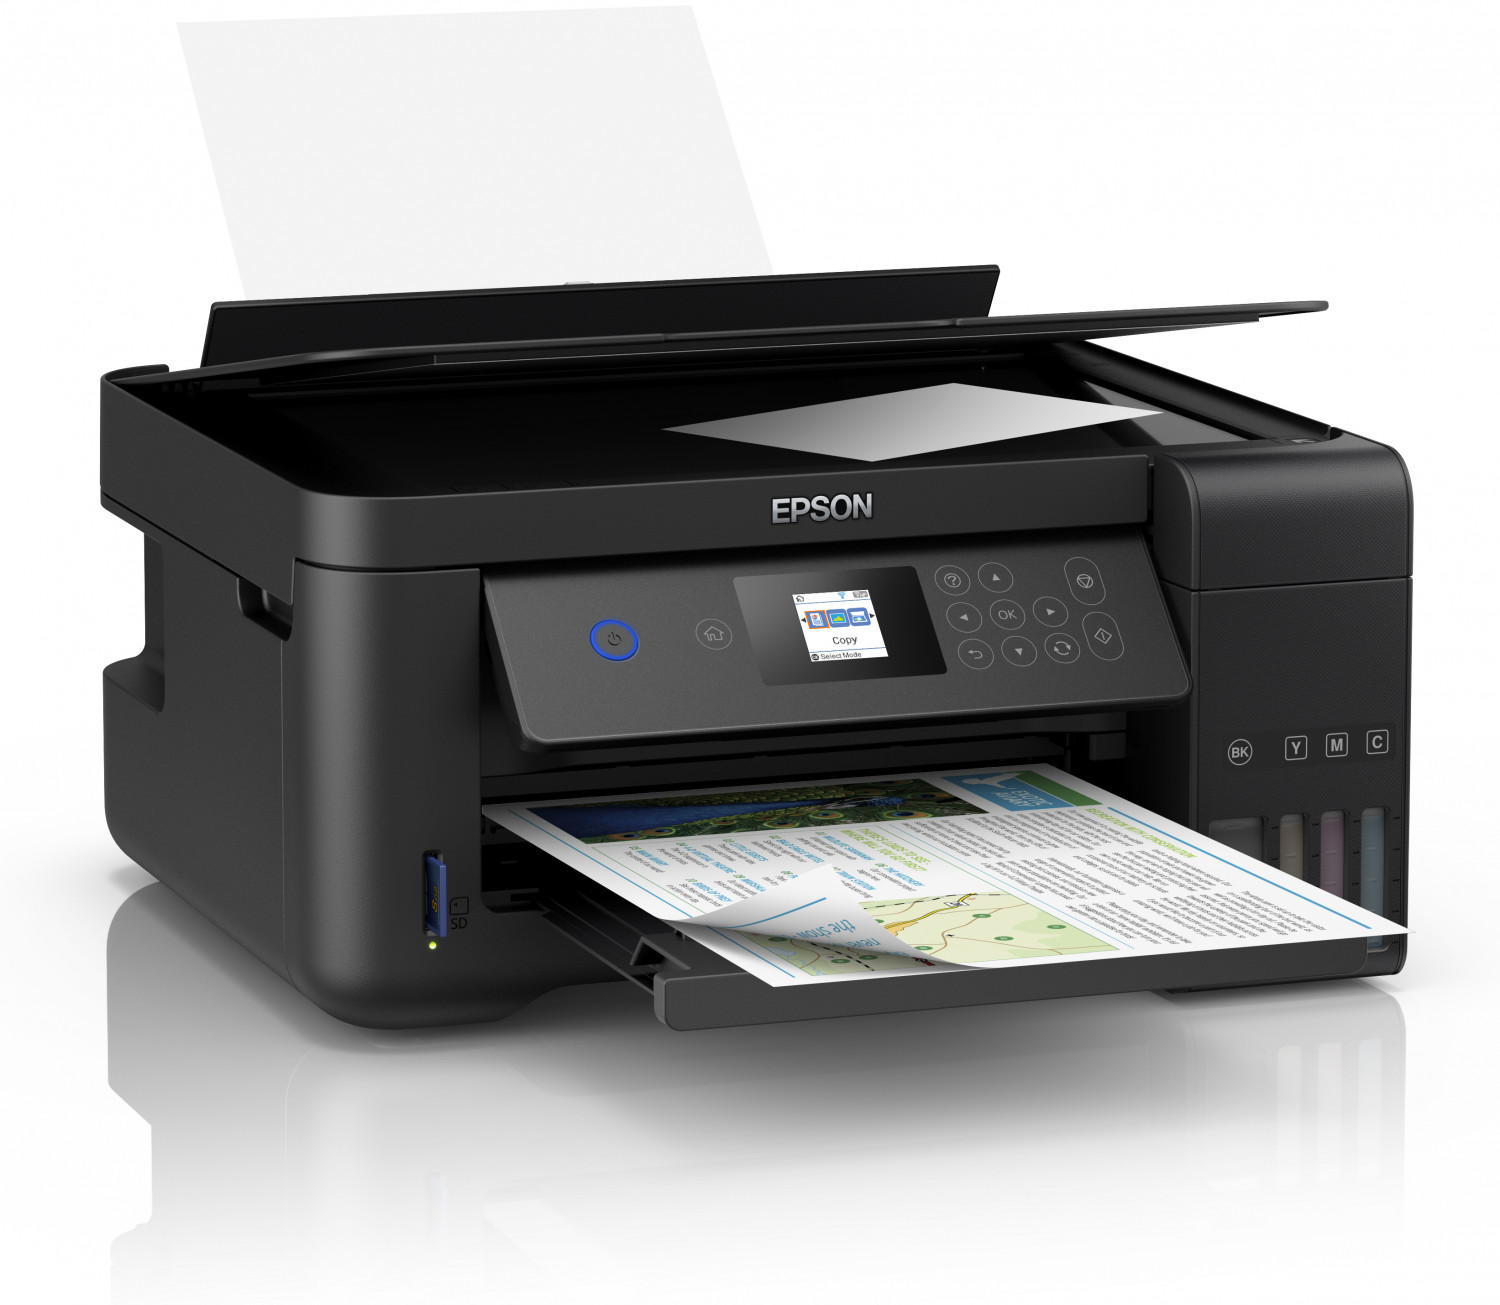 Step-by-step Driver Epson Printer L4150/L4160 CentOS Installation - Featured